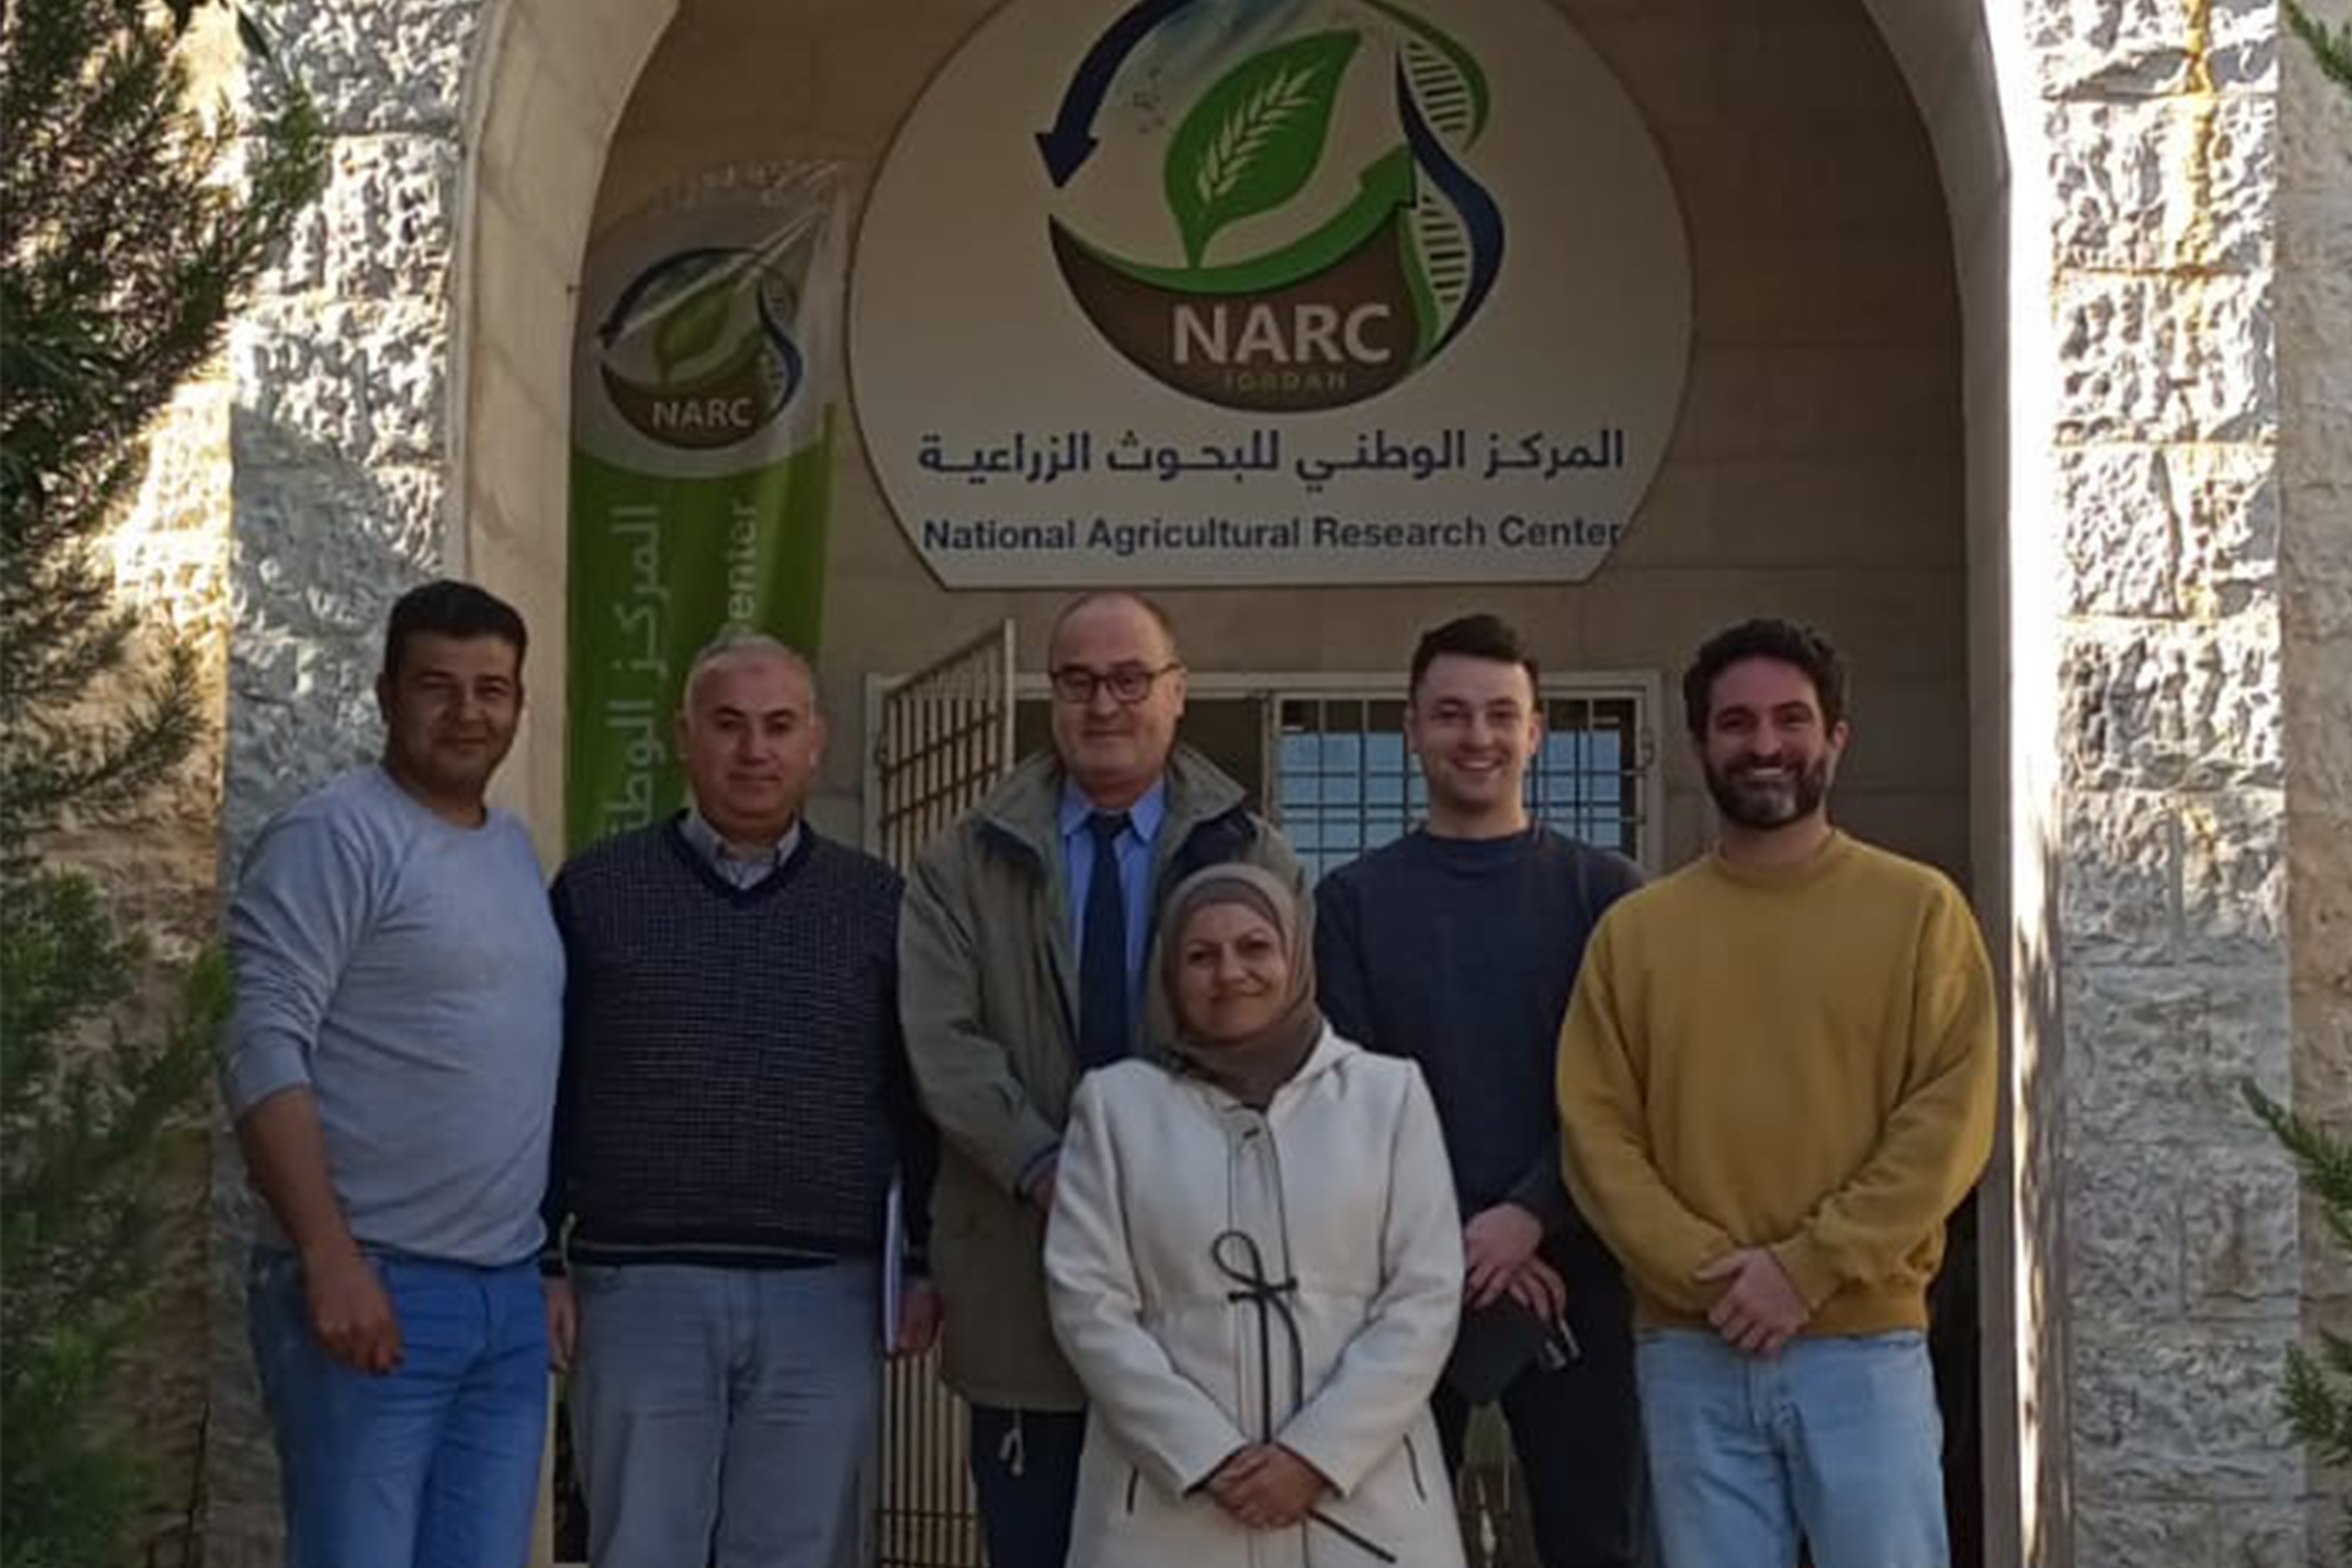 Shlash al-Oun (left), Goggins (center right), and David Coles with researchers at the National Agricultural Research Center in Jordan.